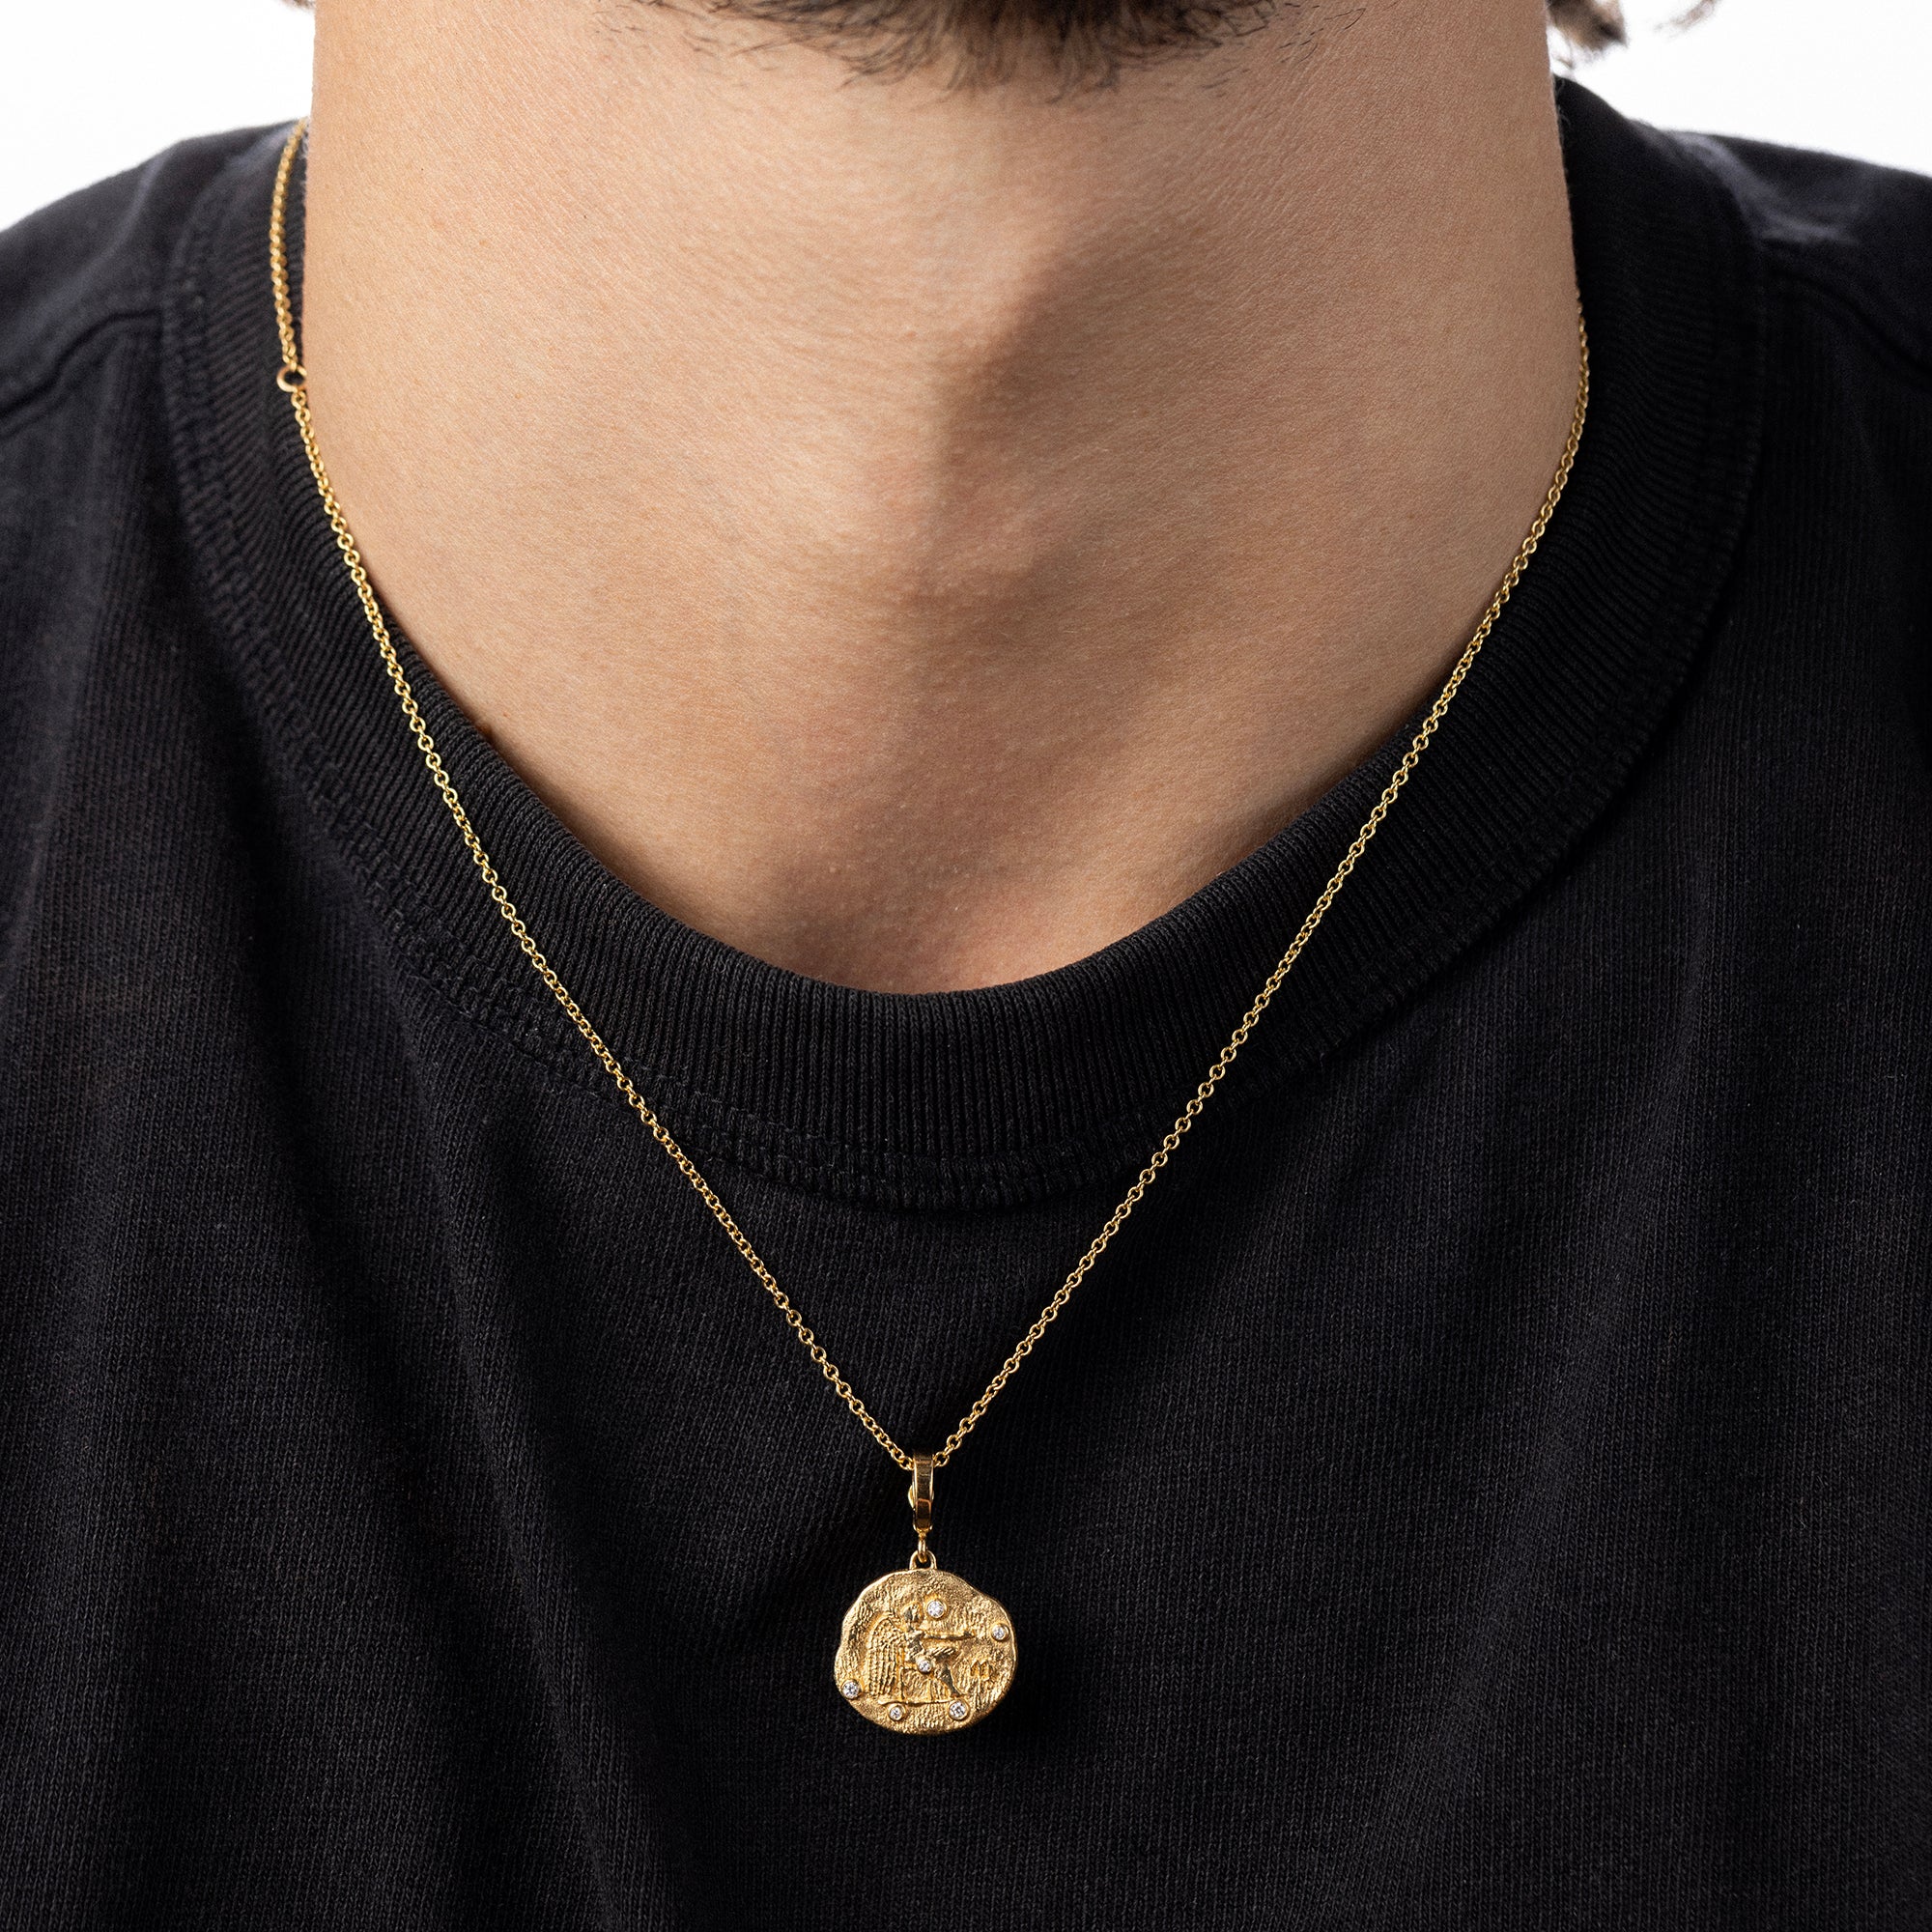 Of The Stars Aries Small Coin Necklace